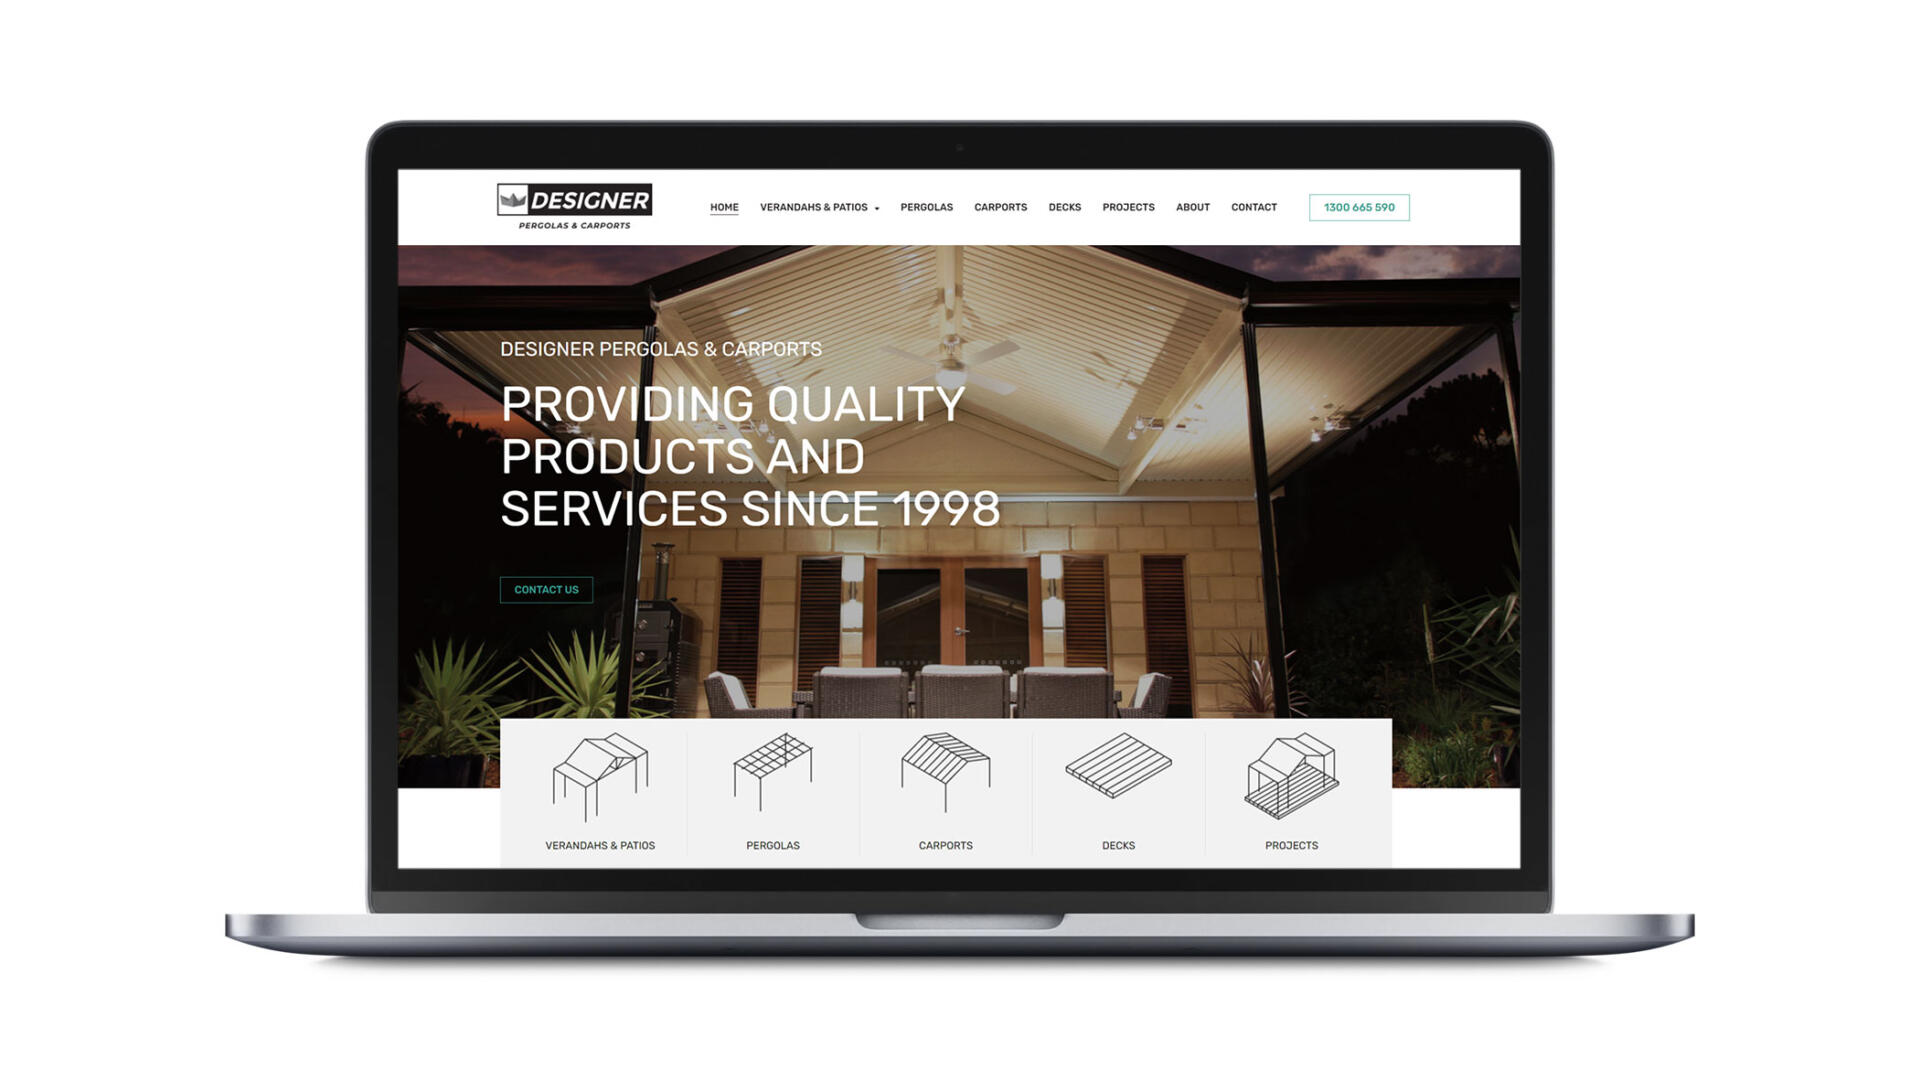 Open laptop showing SEO website designed and developed by Geelong company